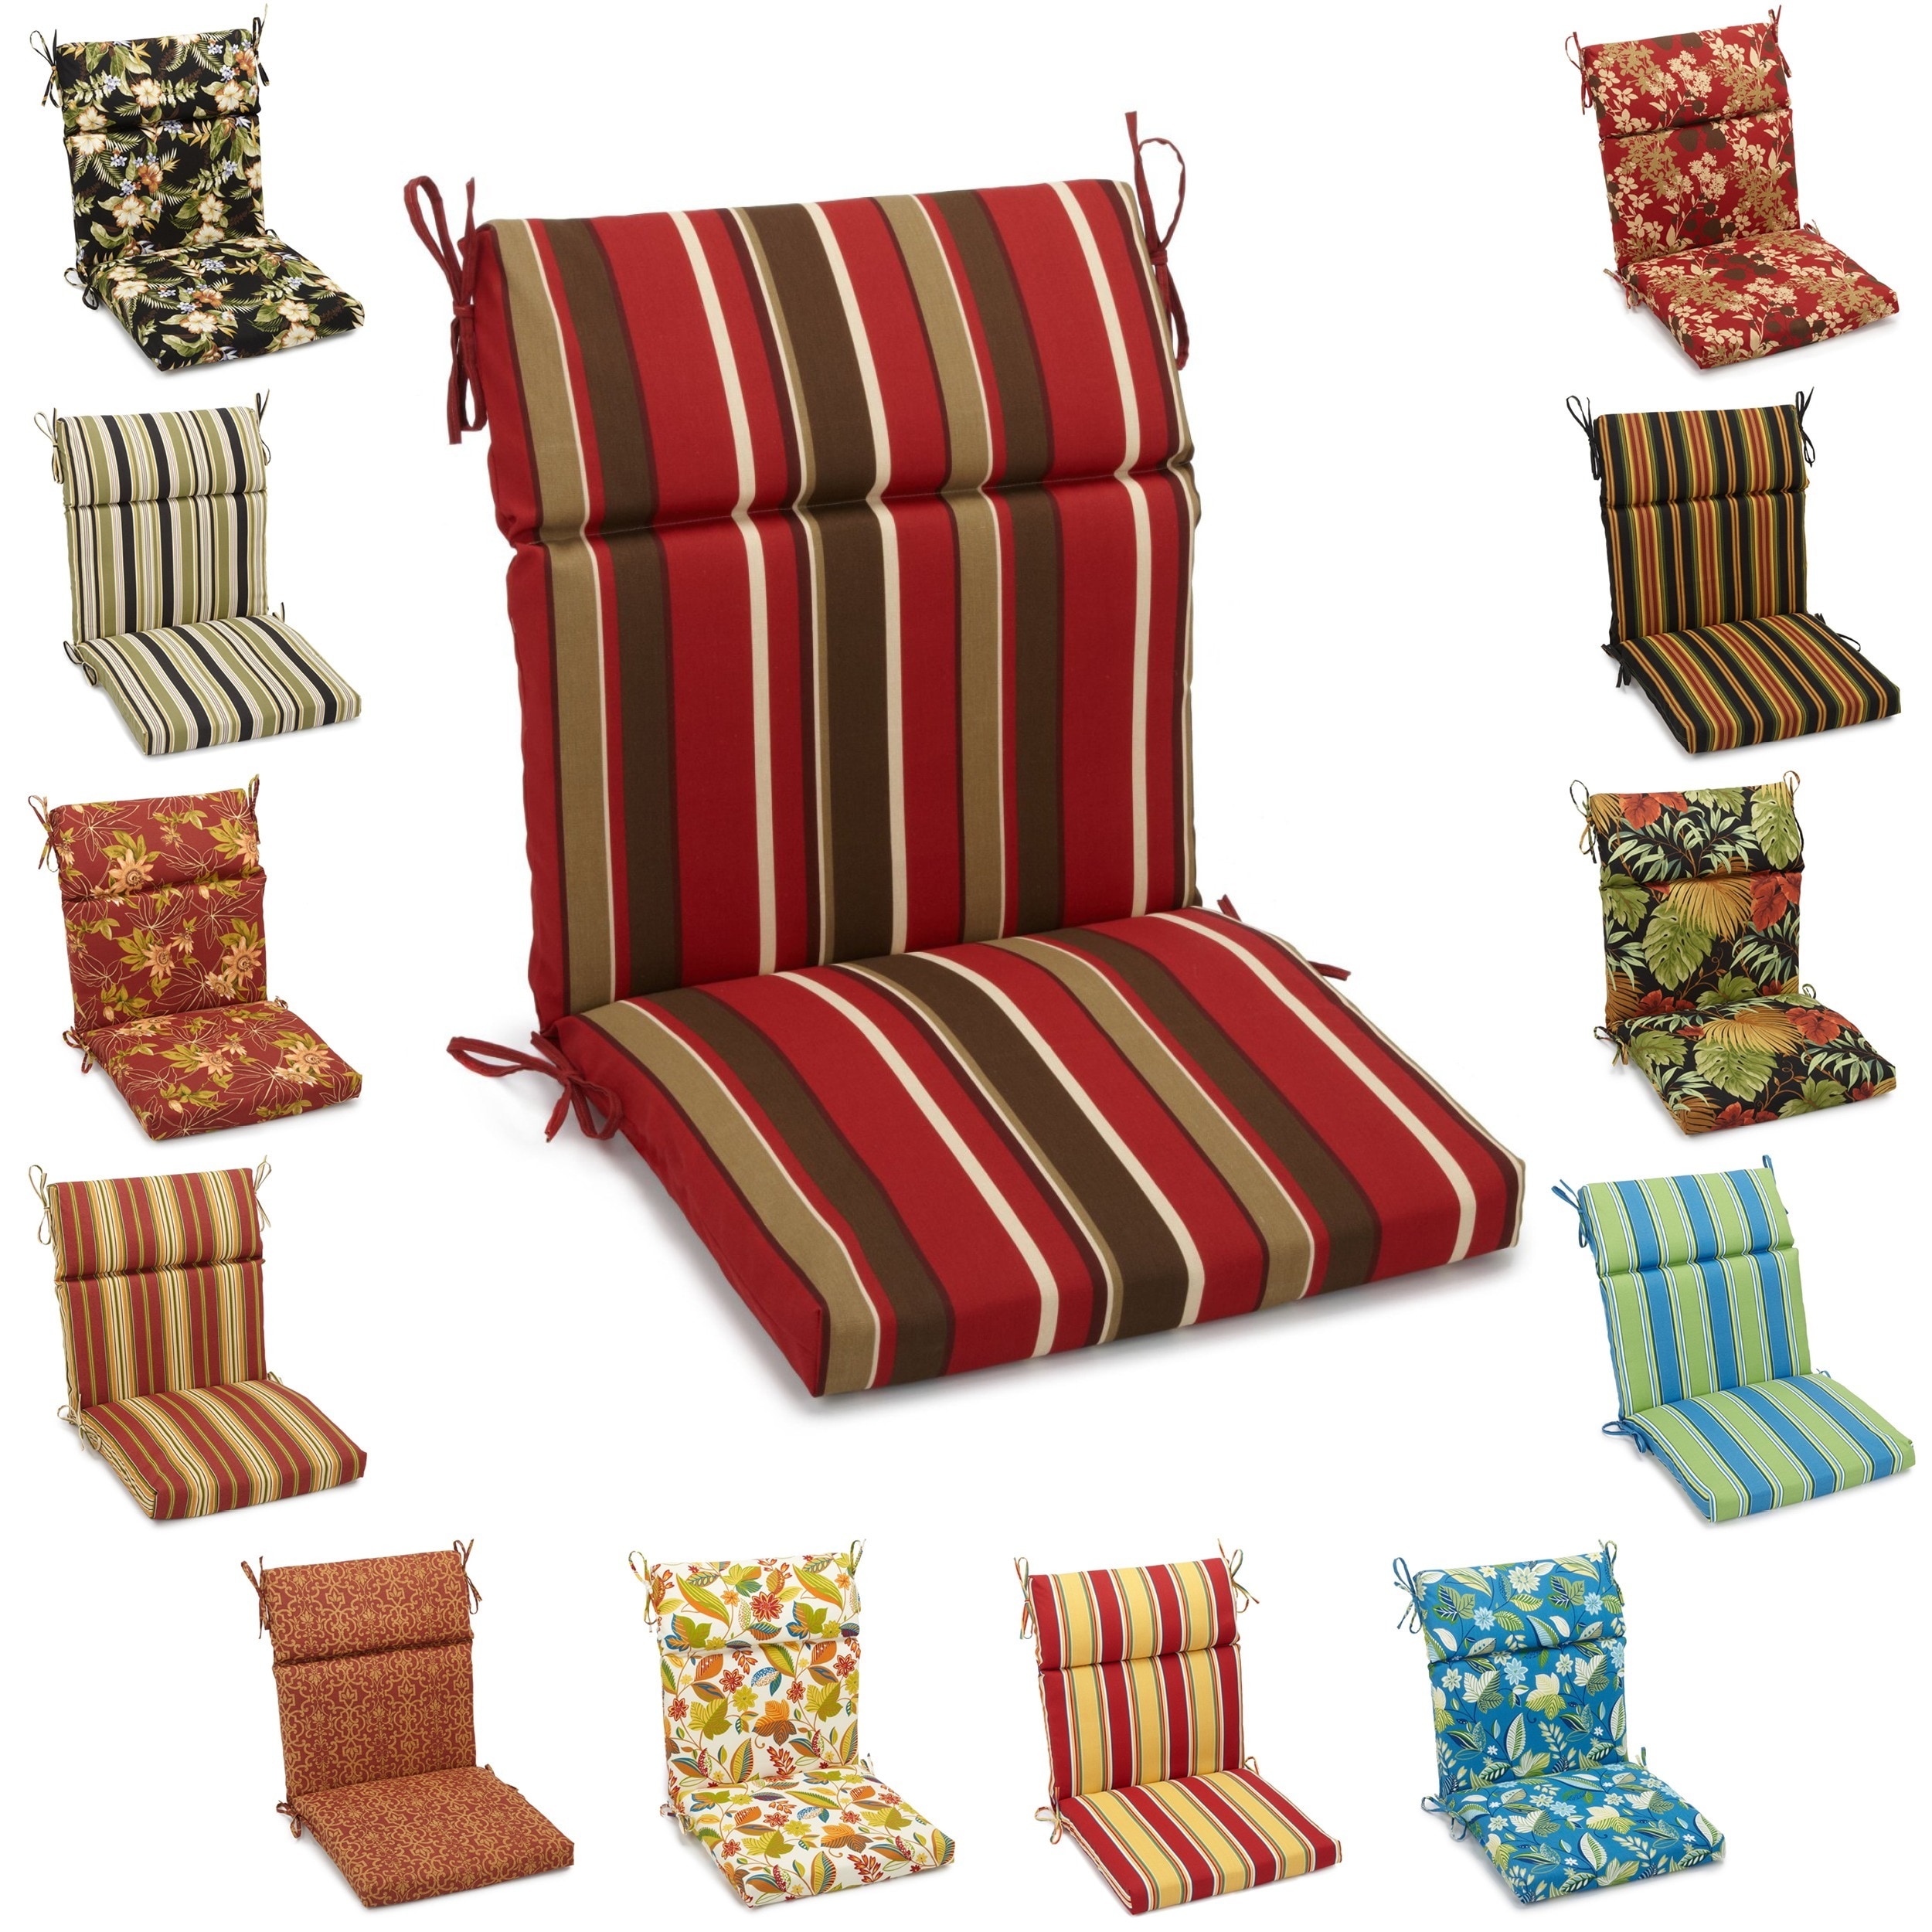 High Back Garden Chairs With Cushions - You'll find products that are